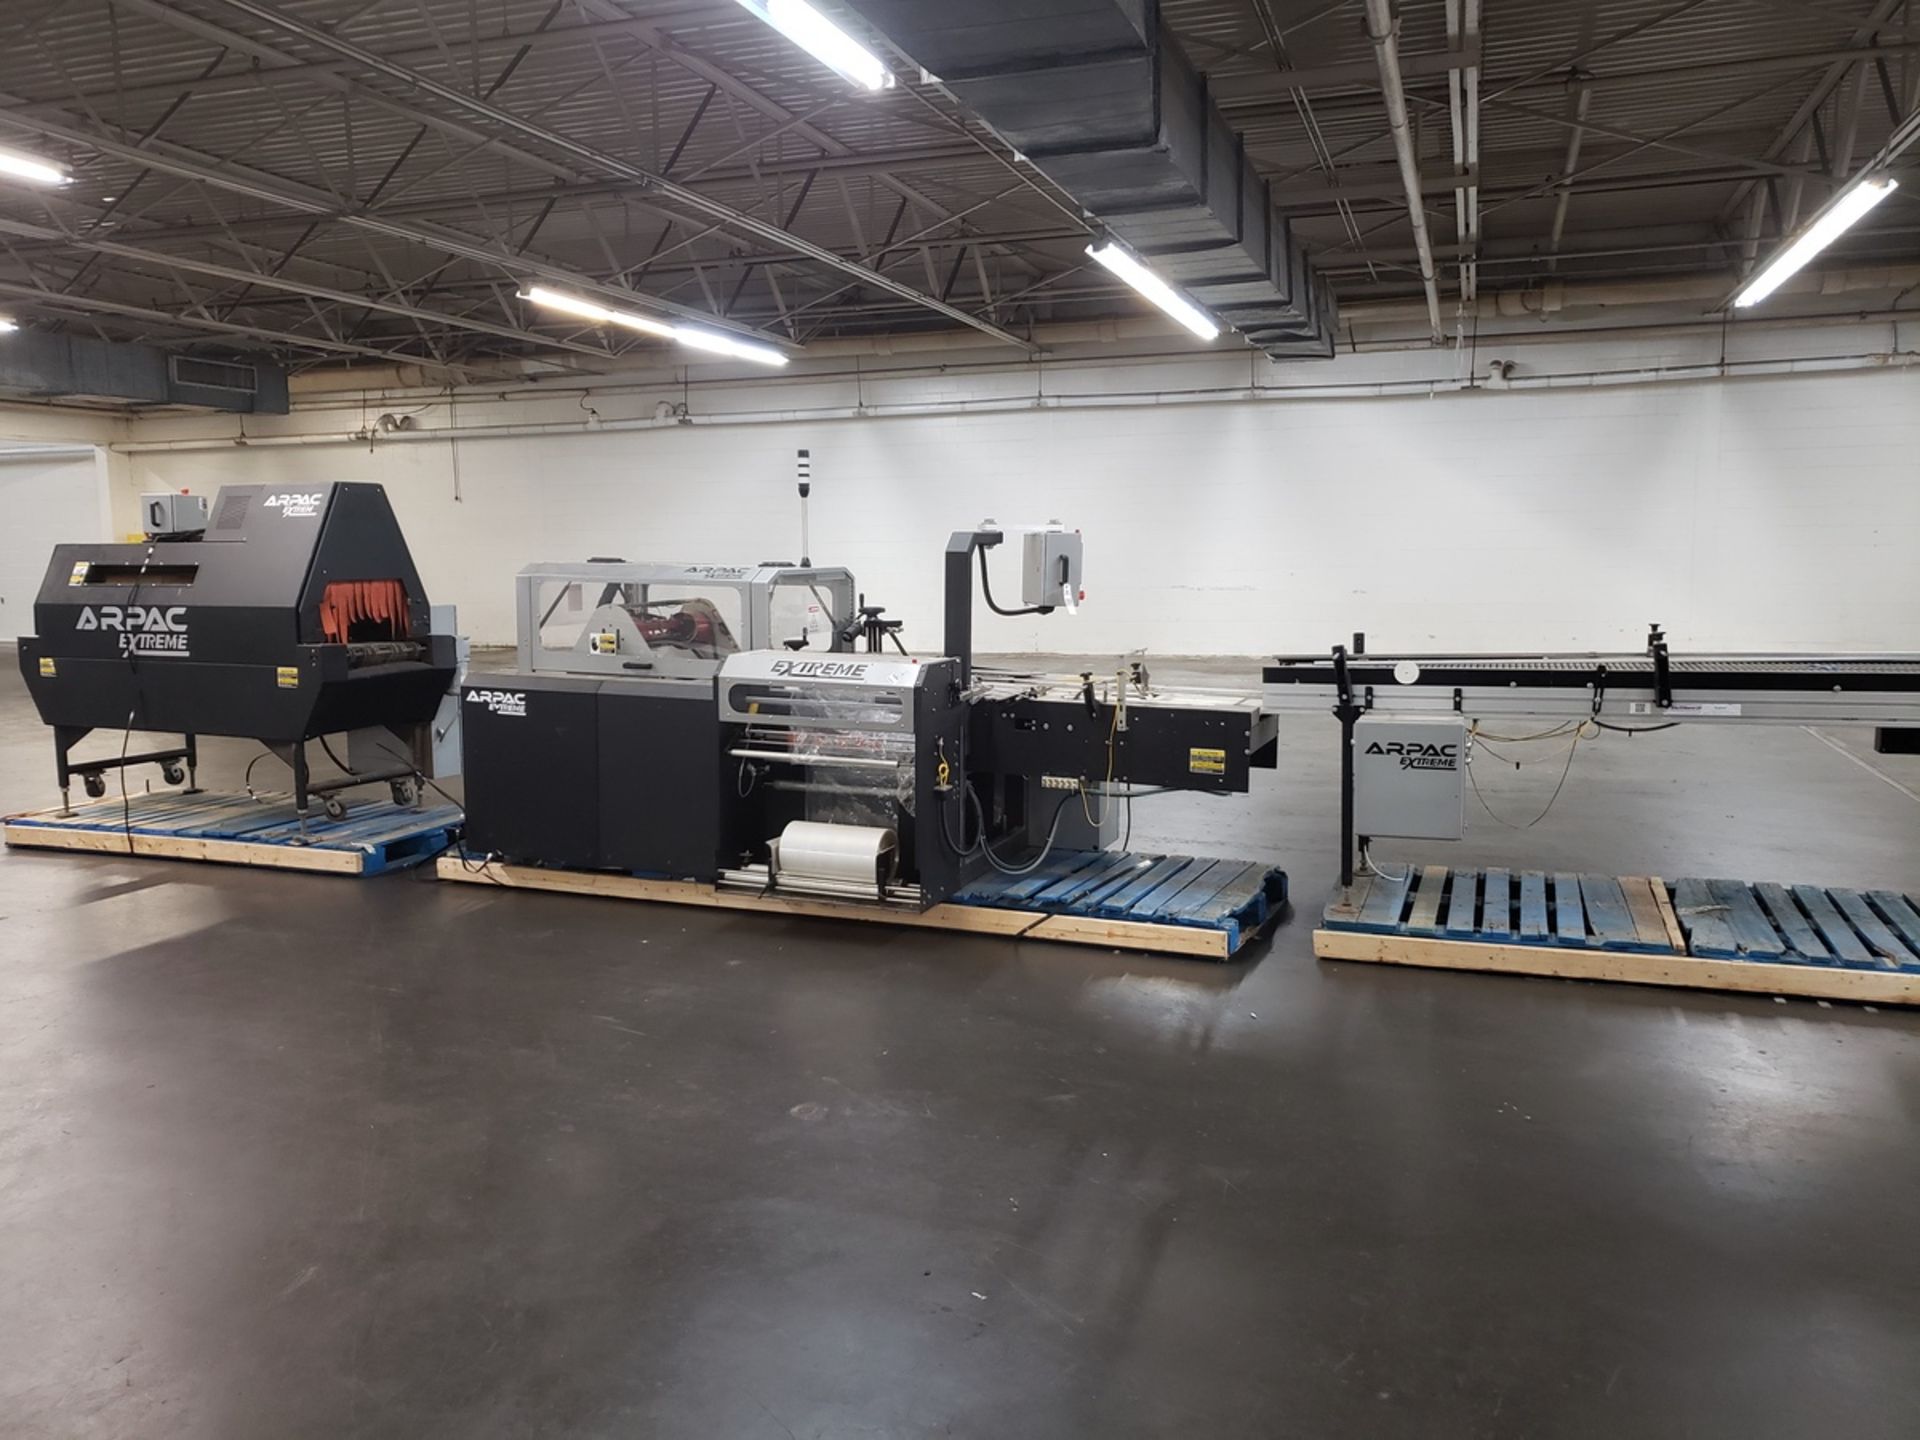 Arpac Extreme Horizontal Flow Wrapping System, M# XR-15-SBF, S/N 16195, W/ Heat Tunnel, M# XT-18, S/